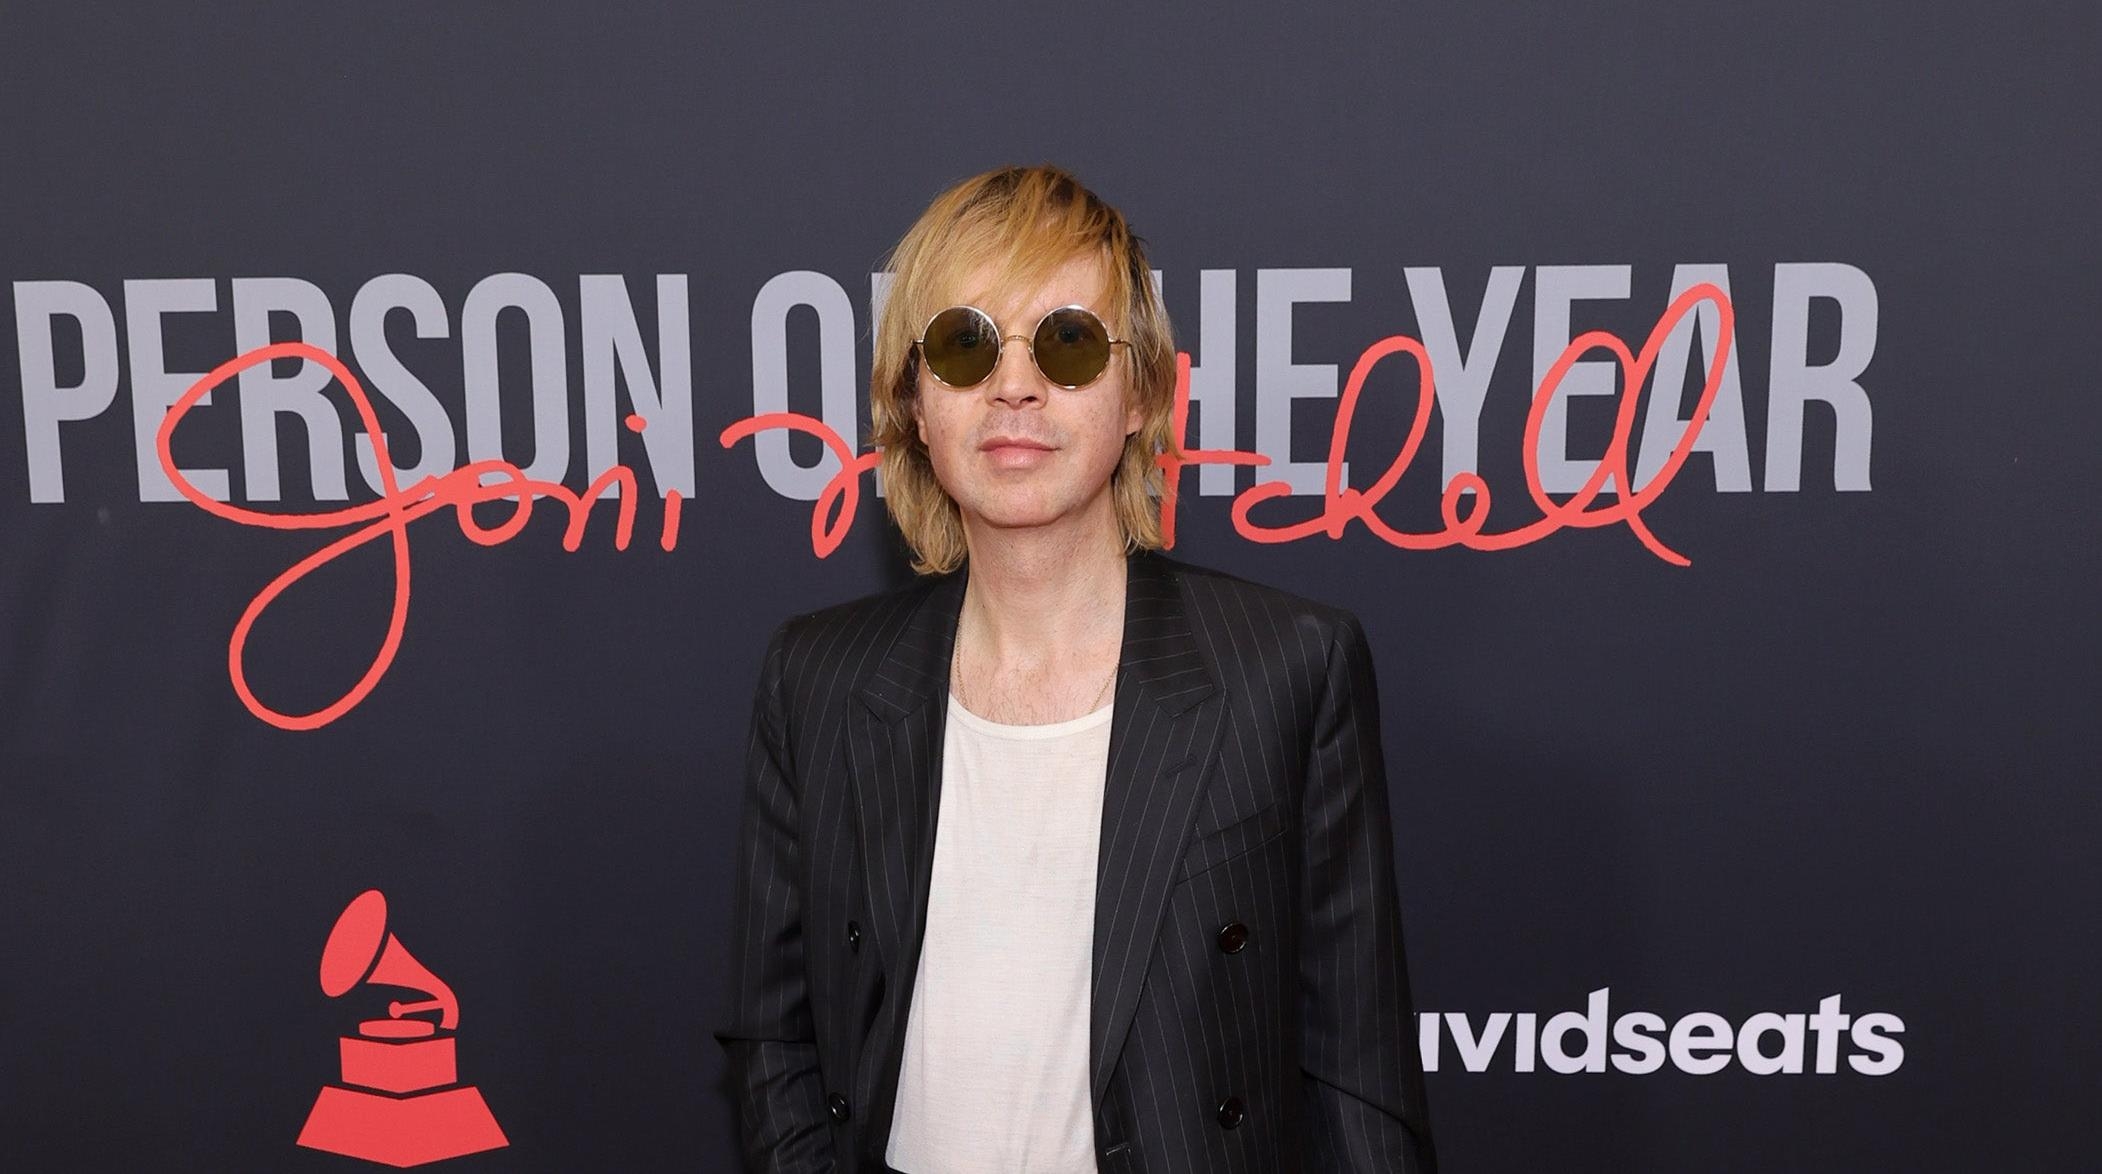 Beck wishes he had let “Weird Al” Yankovic parody “Loser”